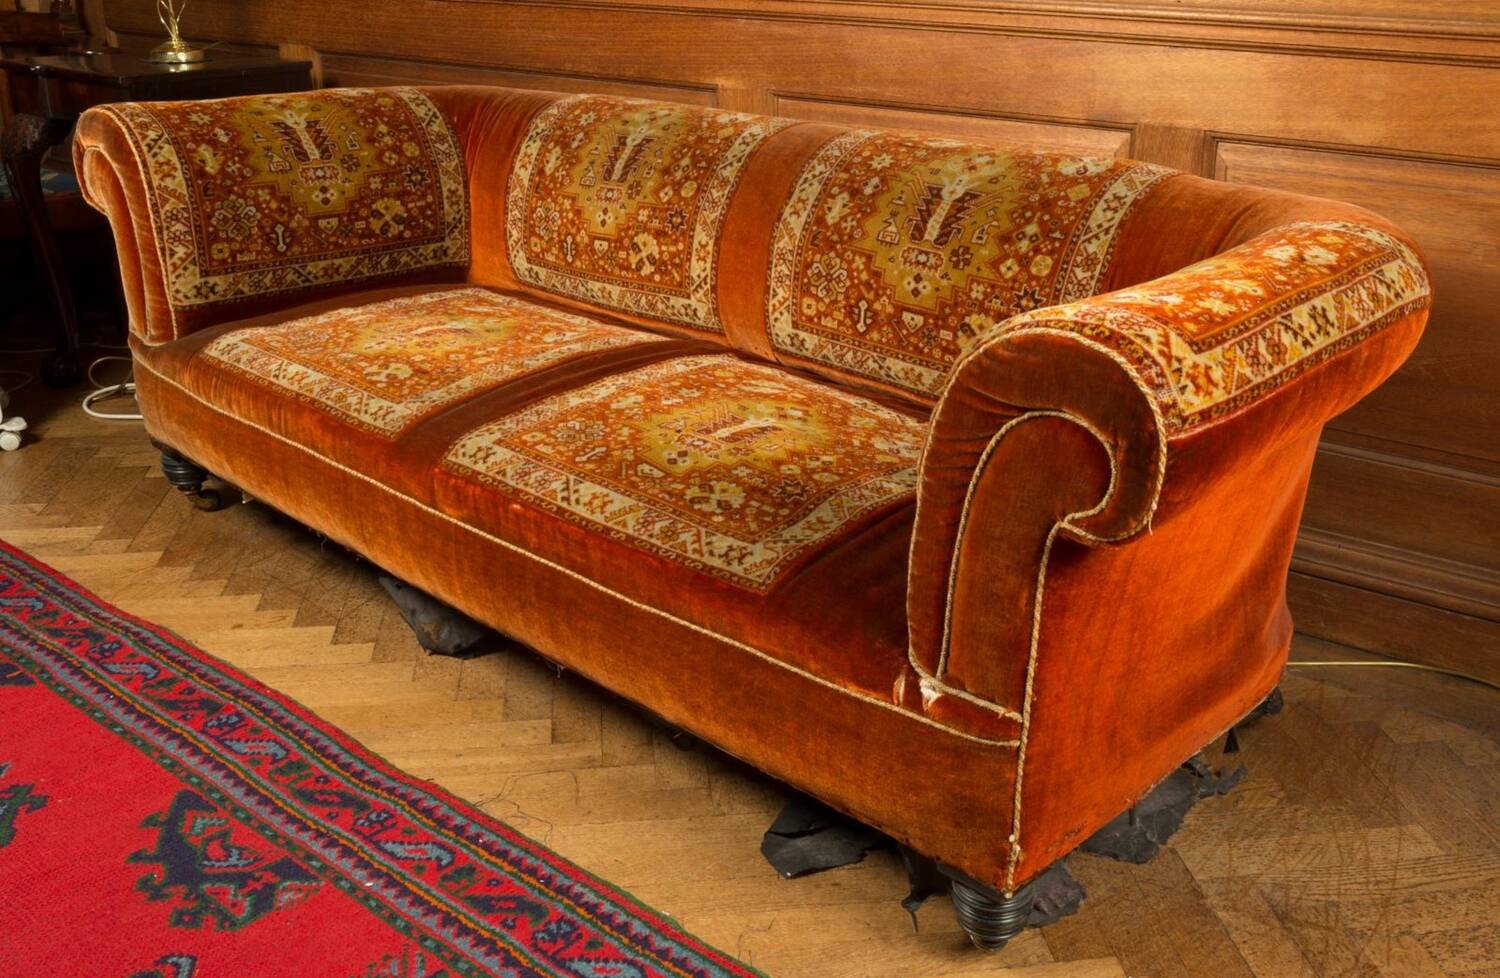 Sofa in Cedar Room, Pollok House. It's a three seater and covered with a Turkish rug-type fabric in bold orange colours. It stands on a wooden floor against the cedar-panelled wall.